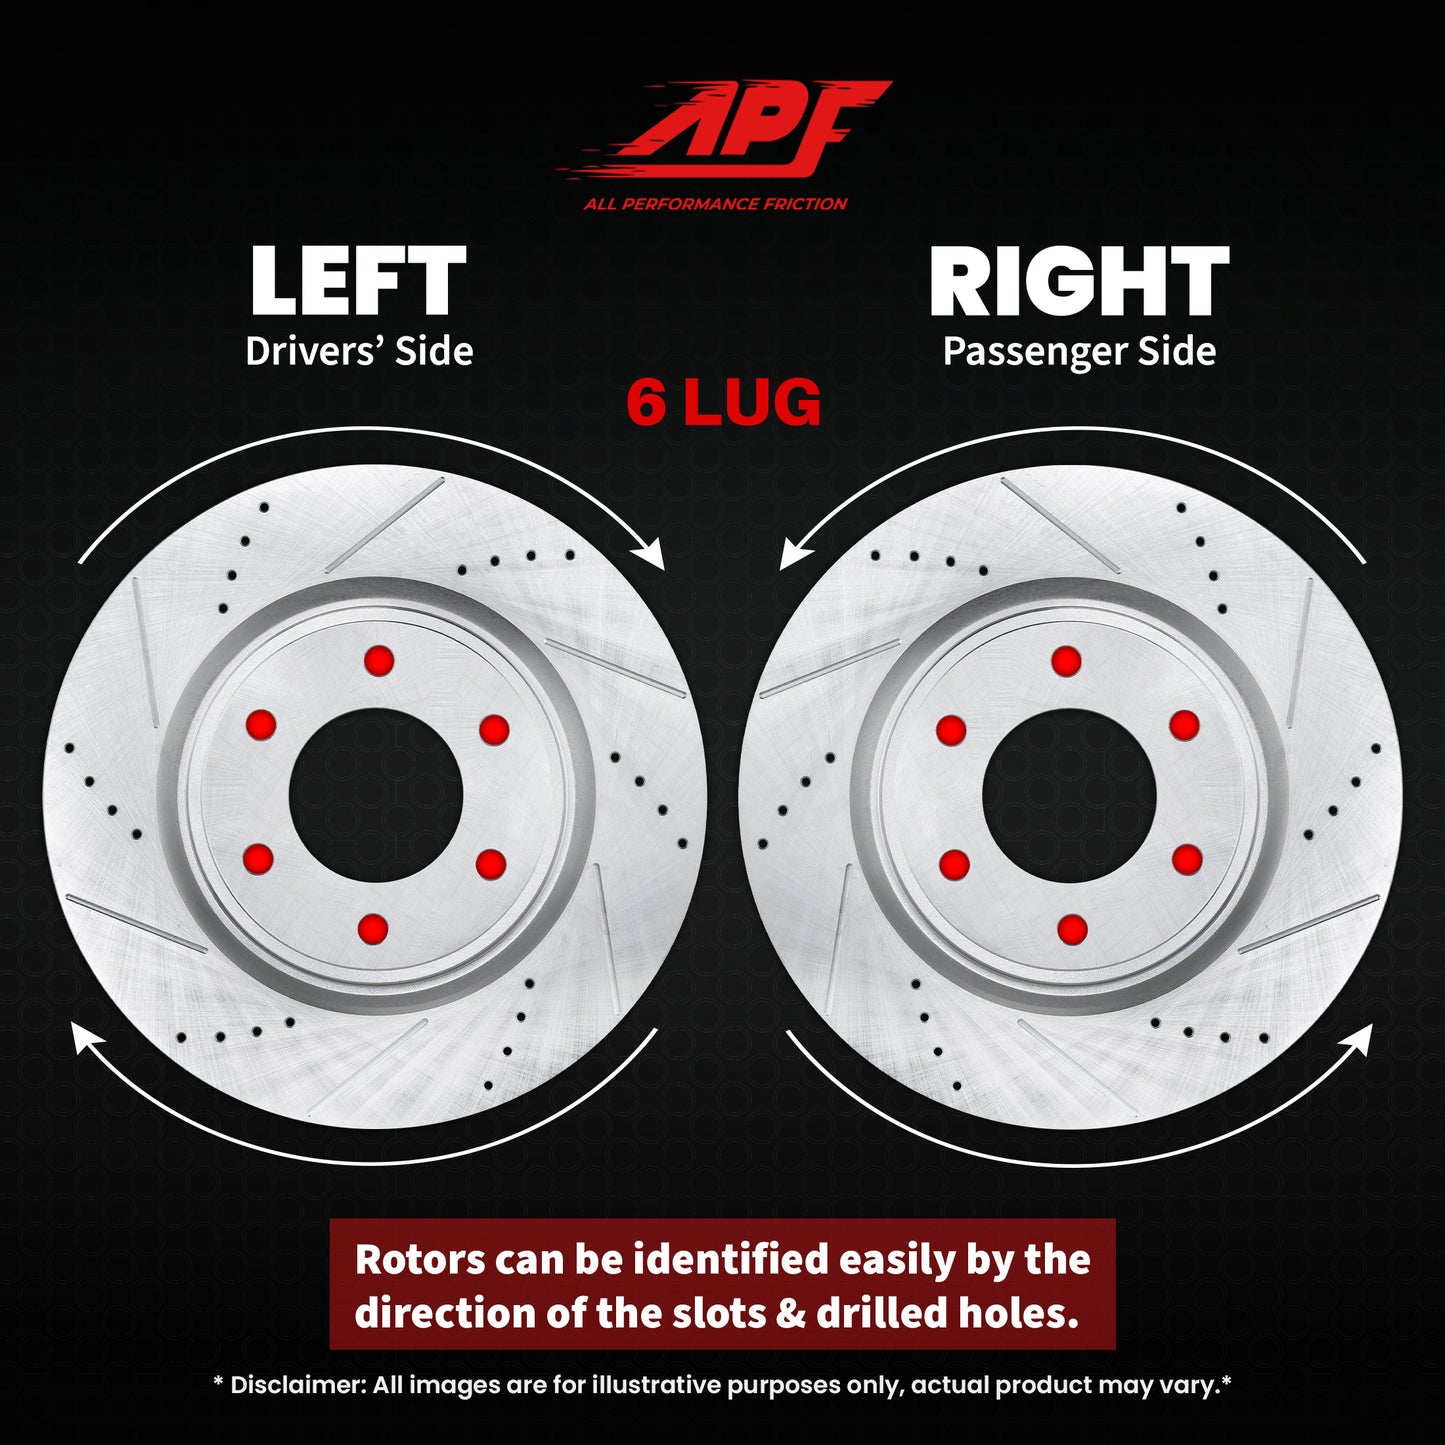 APF All Performance Friction Front Rotors compatible with Chevrolet Aveo5 2007-2011 Zinc Drilled Slotted Rotors | $114.63